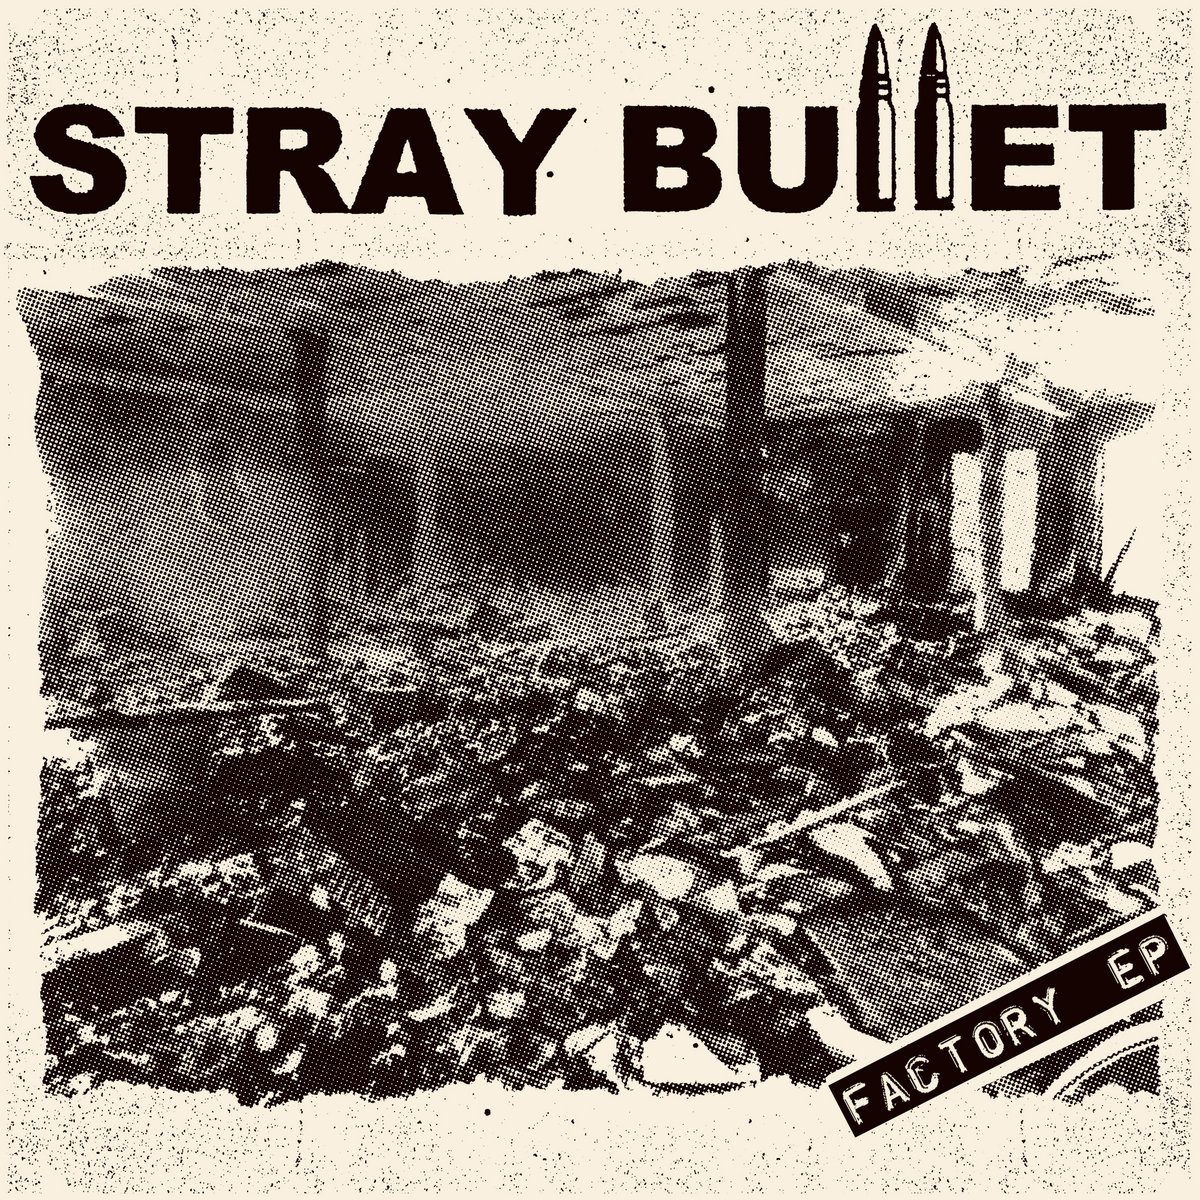 Image of STRAY BULLET "Factory EP" 7" E.P. - Red wax!